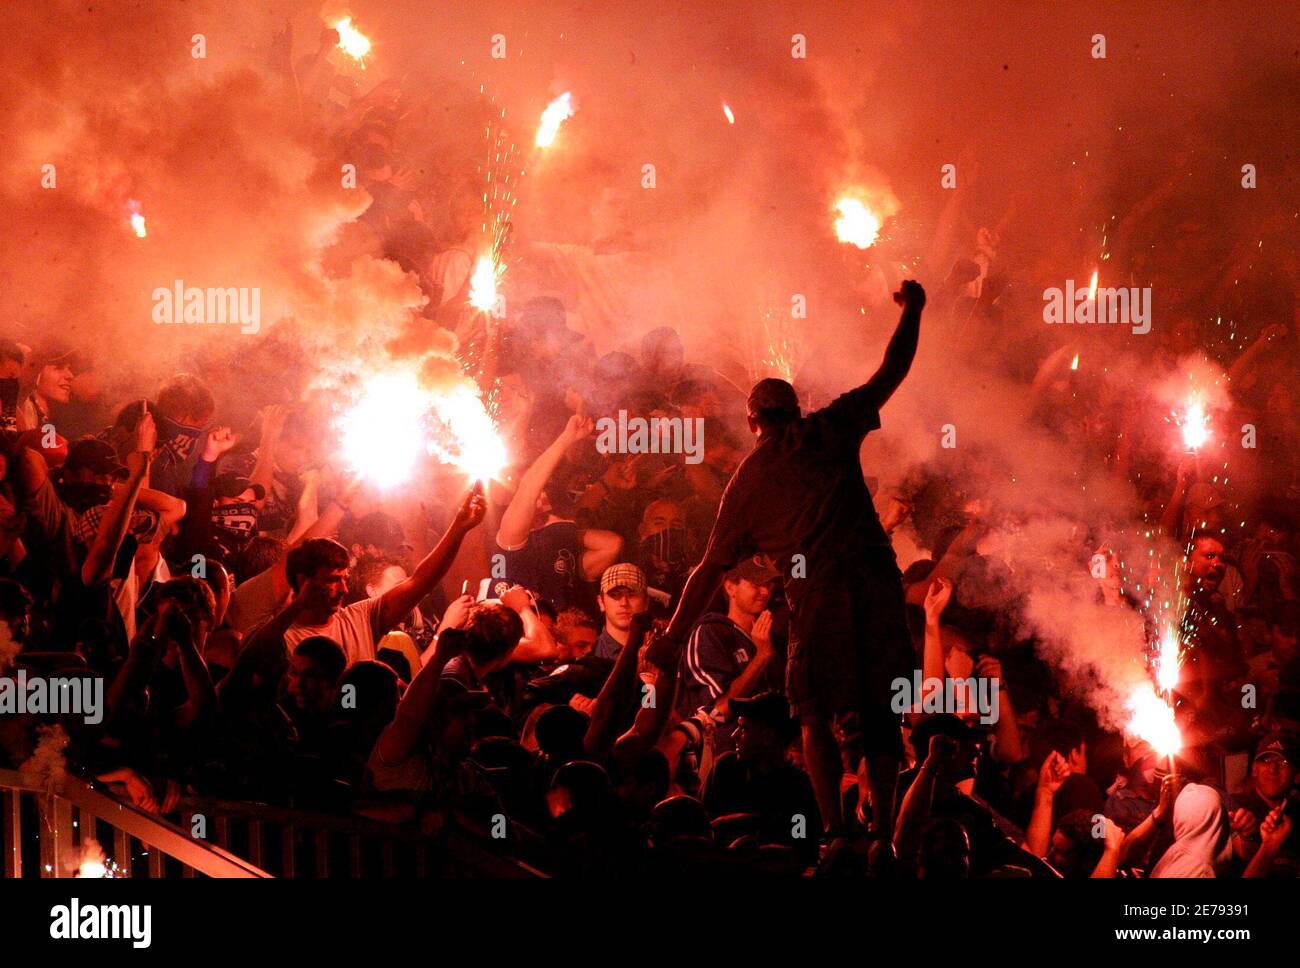 Fans of Croatian soccer club Dinamo Zagreb light flares and torches during local derby Hajduk Split in Zagreb.  Fans of Croatian soccer club Dinamo Zagreb, the 'Bad Blue Boys', light flares and torches in the stands during a match with archrivals Hajduk Split in Zagreb September 11, 2005. The high-risk derby, played amid fears of crowd trouble, was monitored by almost 1,000 policemen. REUTERS/Nikola Solic Stock Photo